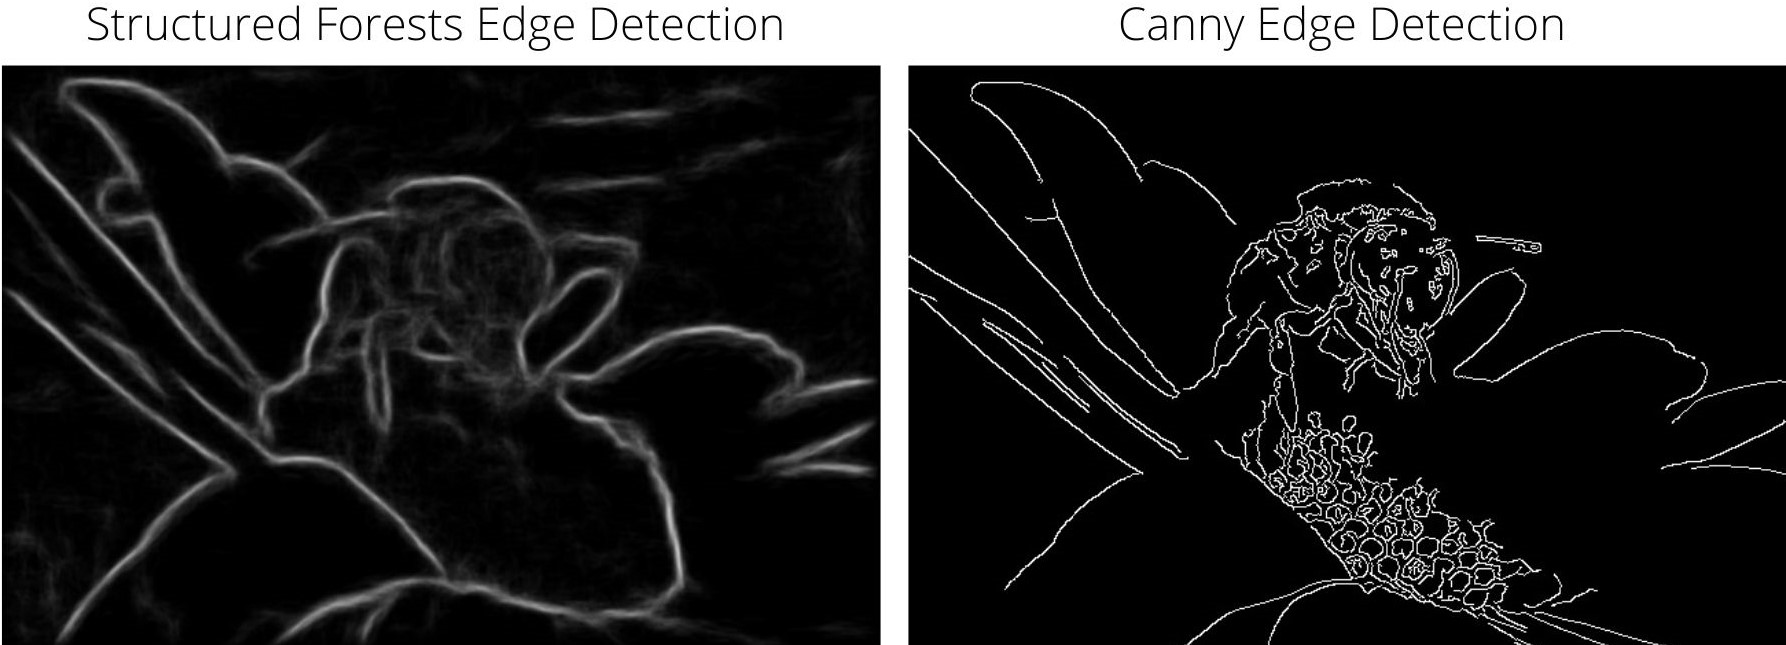 Edge Detection using Structured Forests with OpenCV